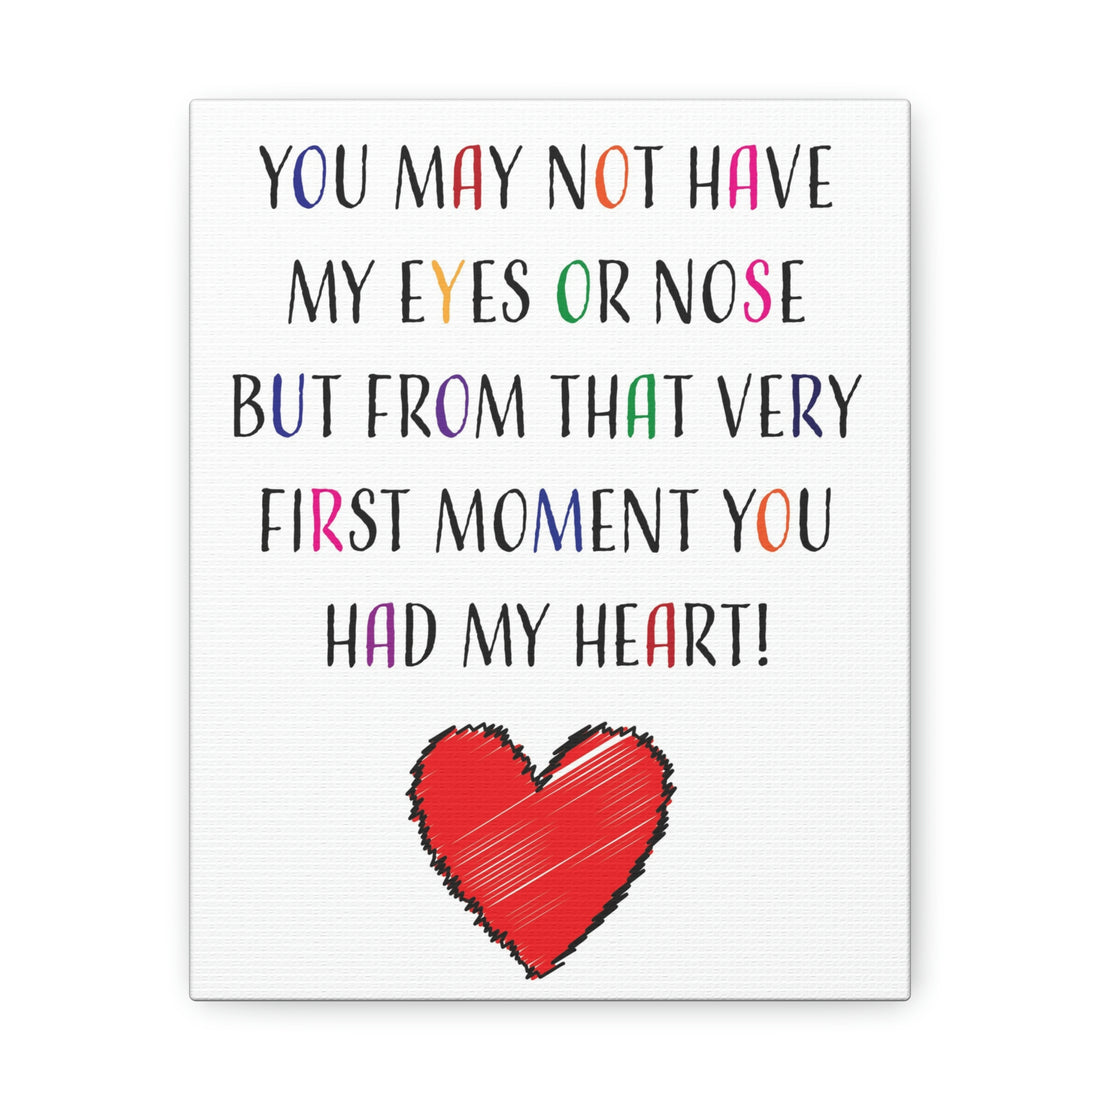 You may not have my eyes or nose but from that very first moment you had my HEART - Canvas Print